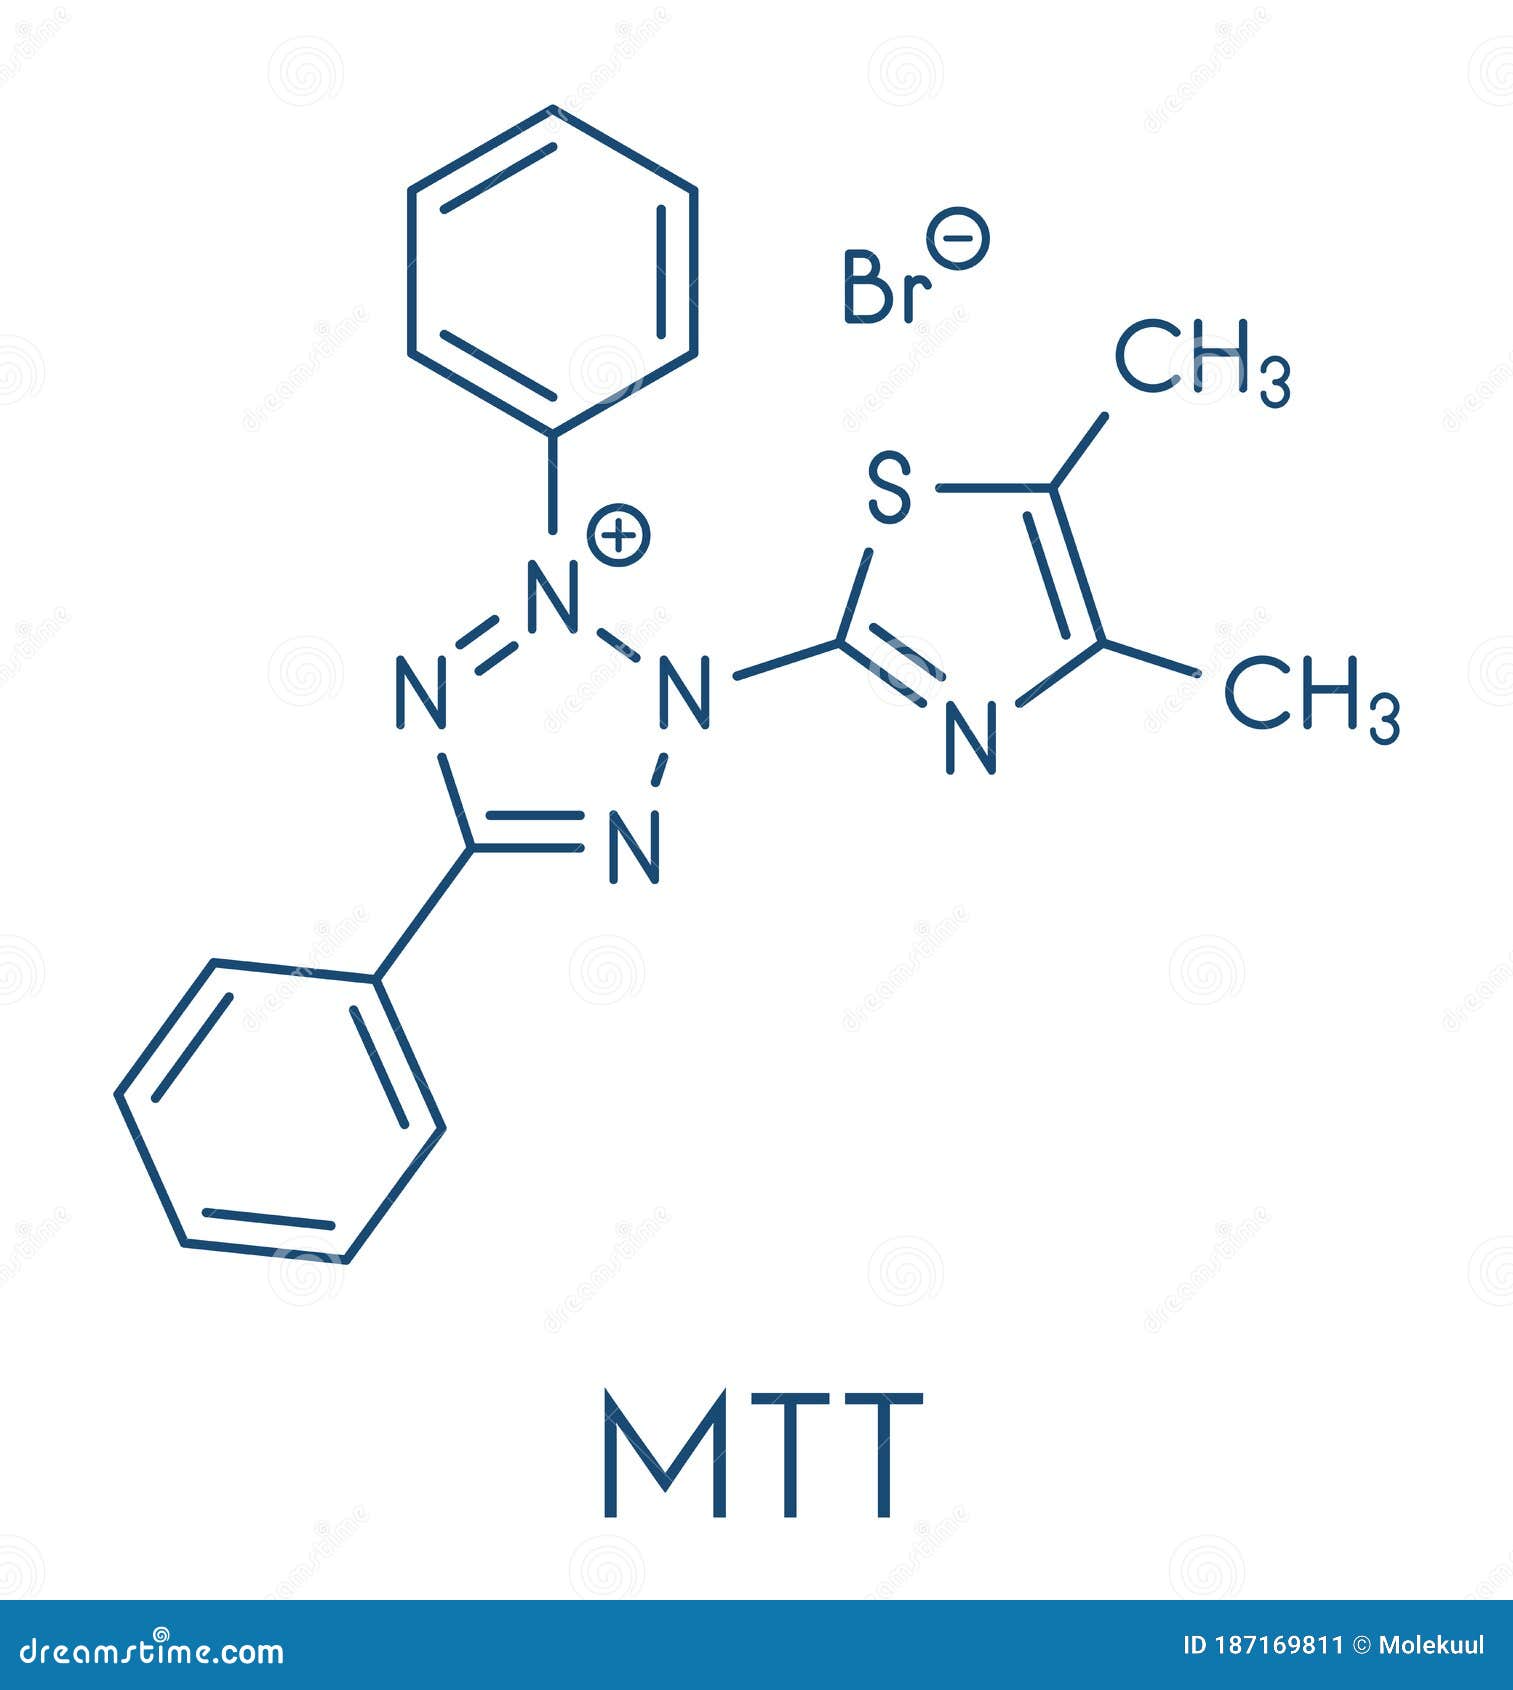 mtt yellow tetrazole dye molecule. used in mtt assay, used to measure cytotoxicity and cell metabolic activity. skeletal formula.